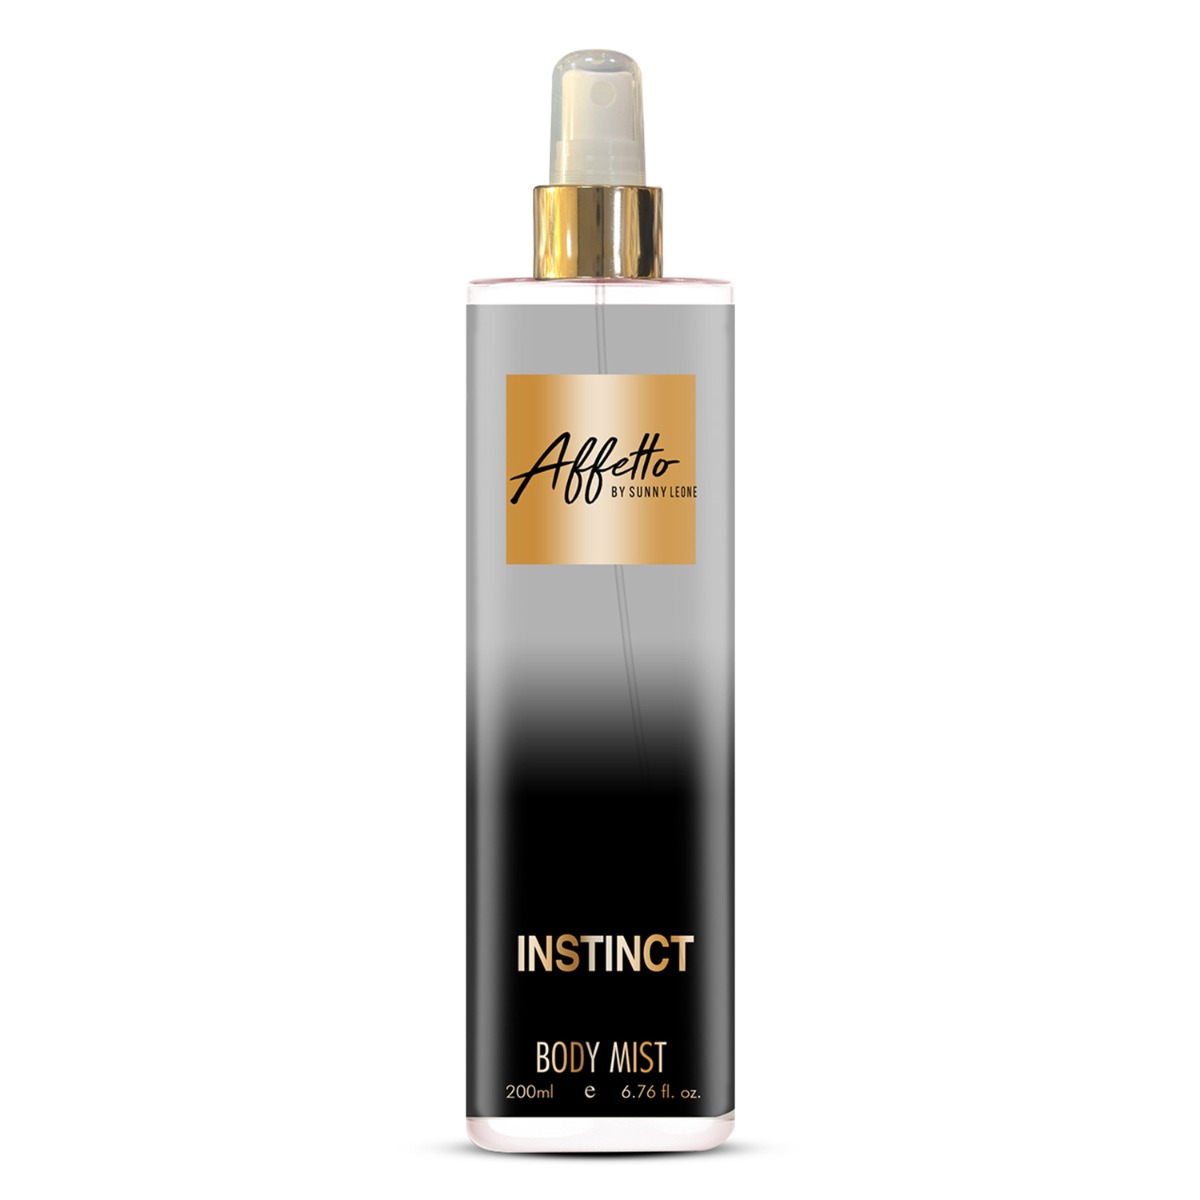 Star Struck by Sunny Leone Affetto by Sunny Leone Body Mist for Him - Instinct, 200ml